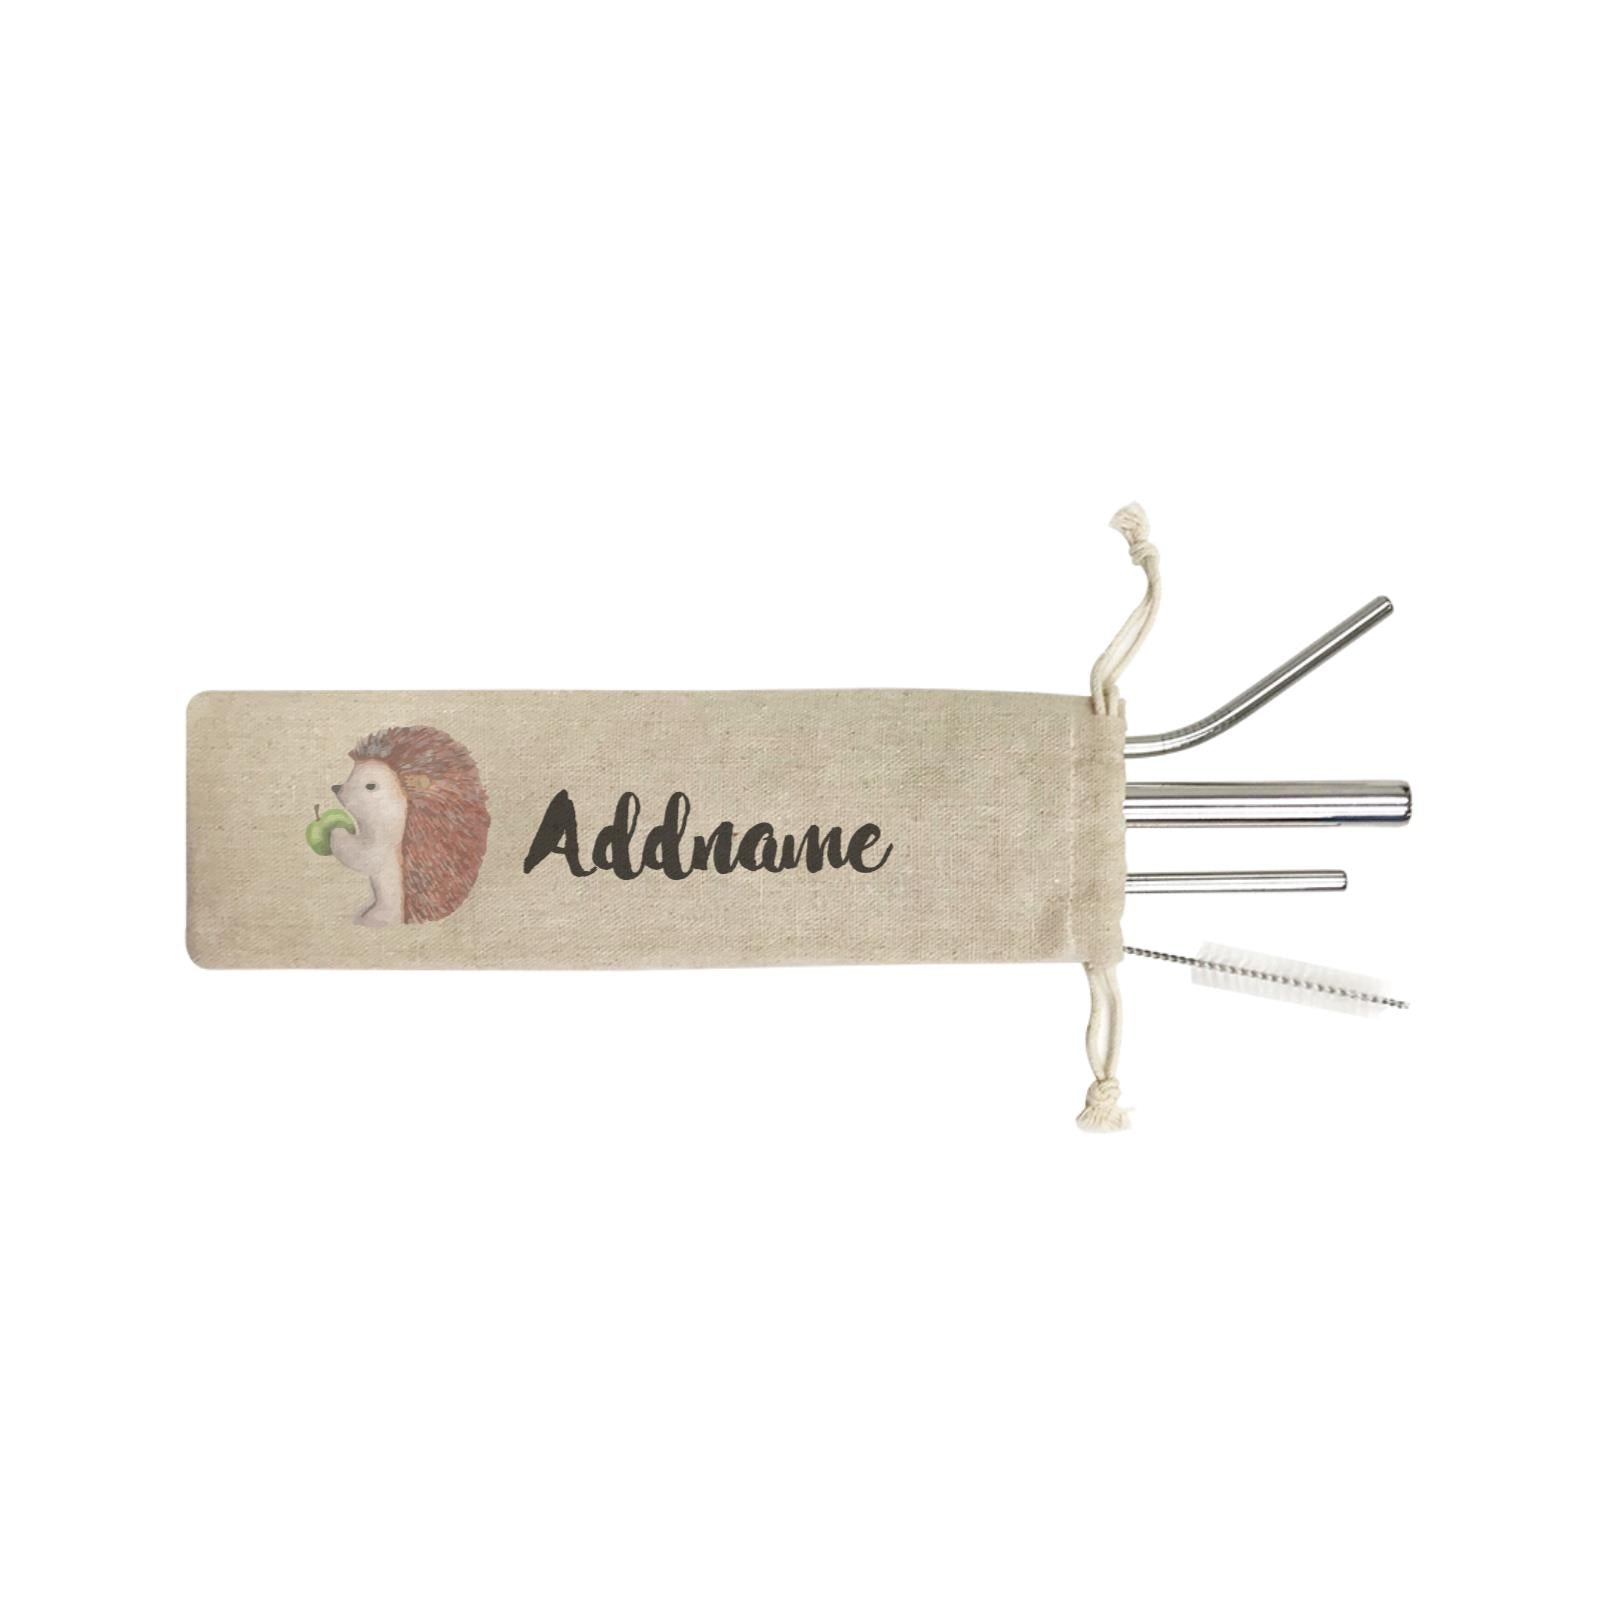 Watercolour Animal Sweet Porcuppine Green Apple Addname SB 4-in-1 Stainless Steel Straw Set In a Satchel